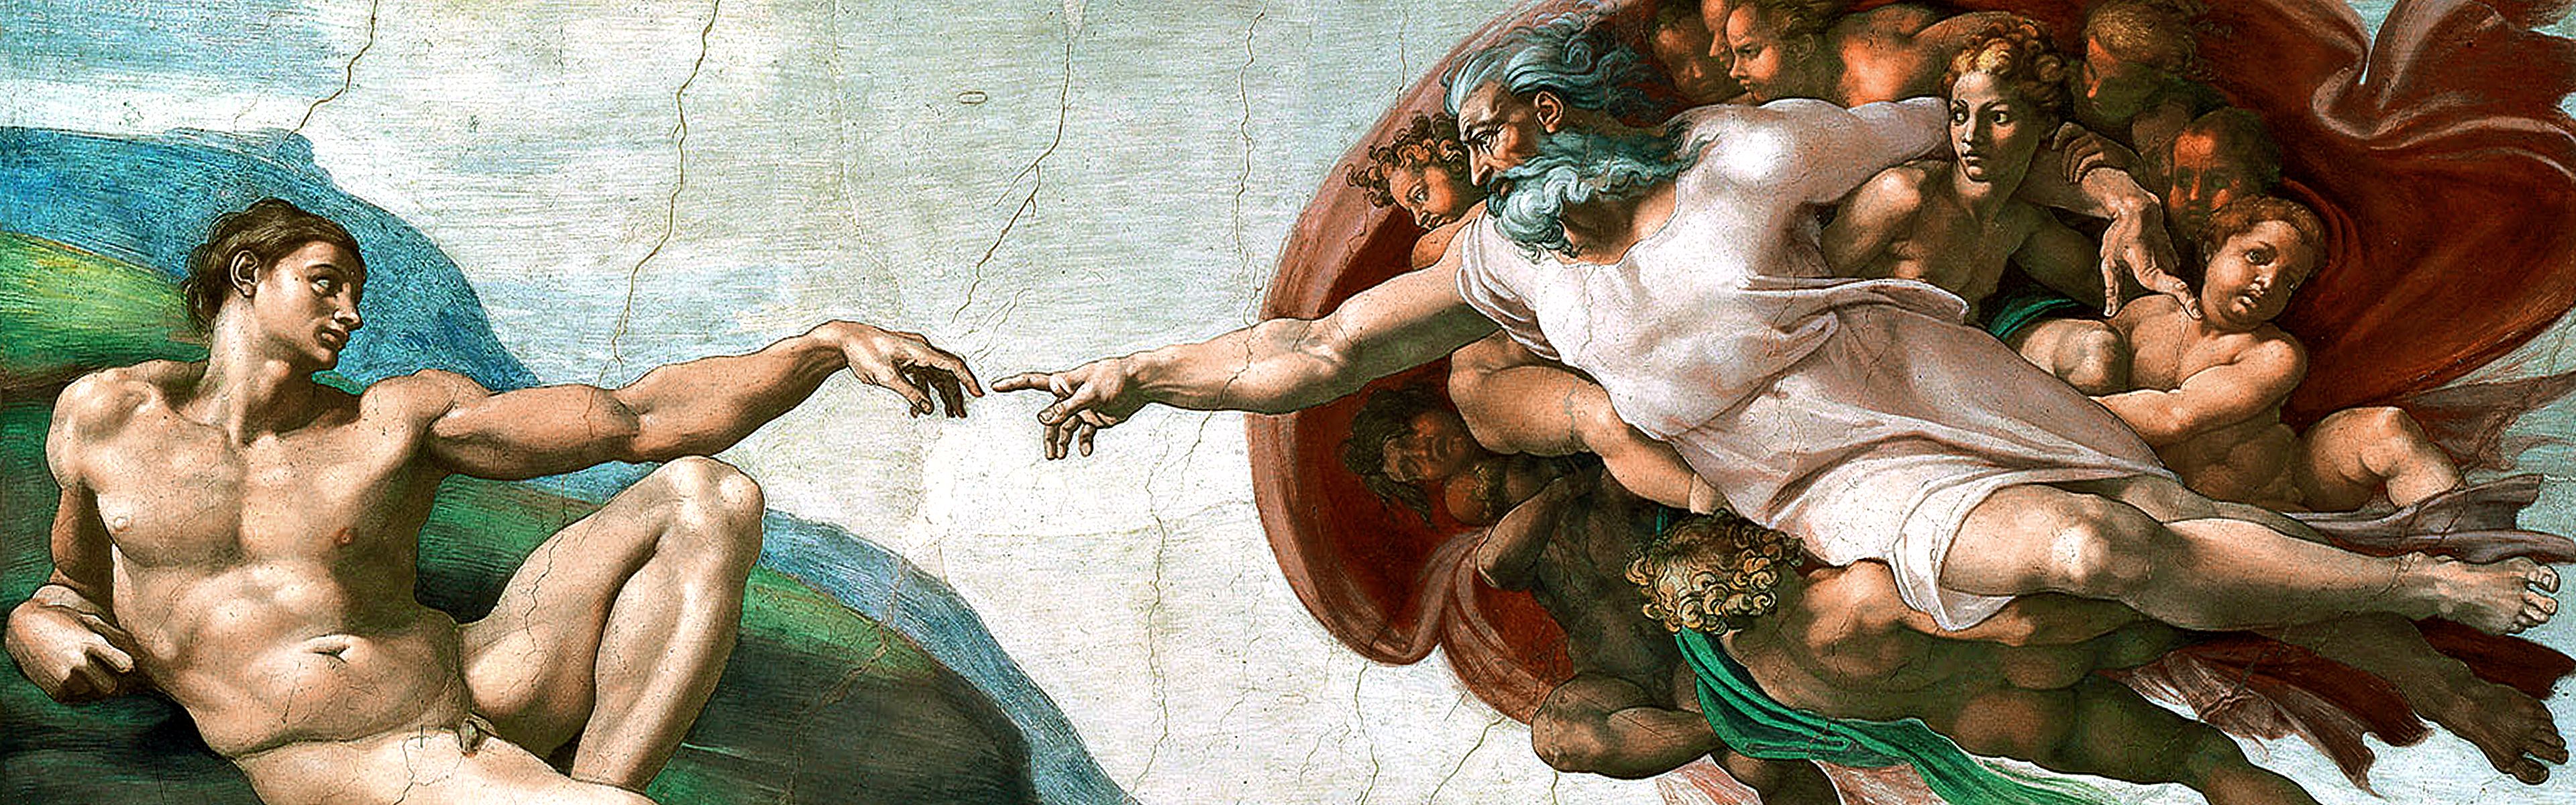 Detail from Michelangelo's painting, The Creation of Adam, showing God's hand touching Adam's hand. - The Creation of Adam